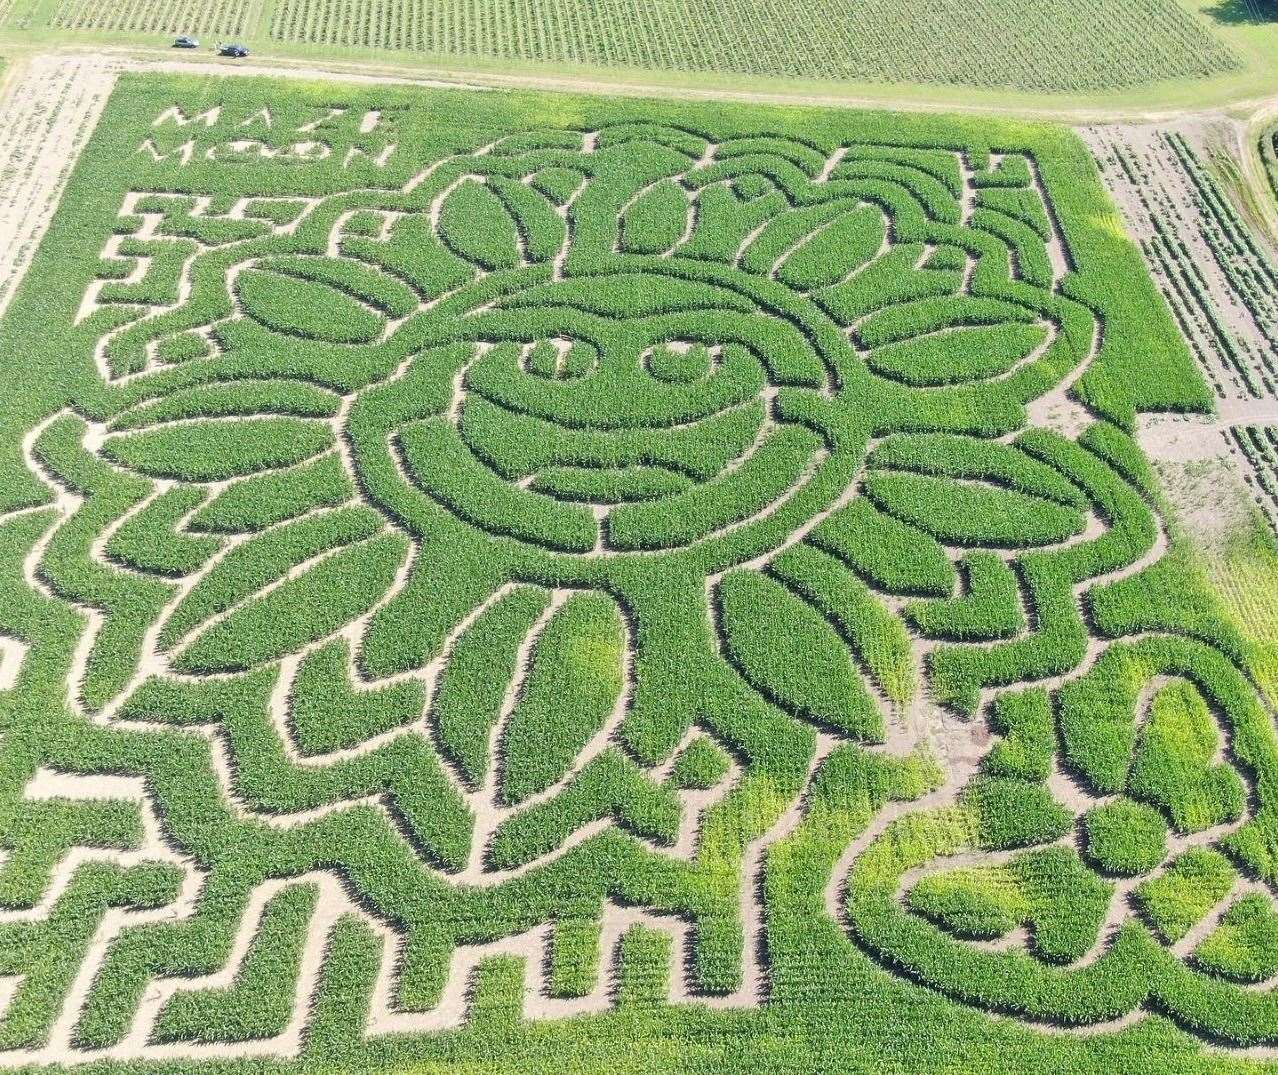 A giant sunflower can be seen from the air in Maidstone